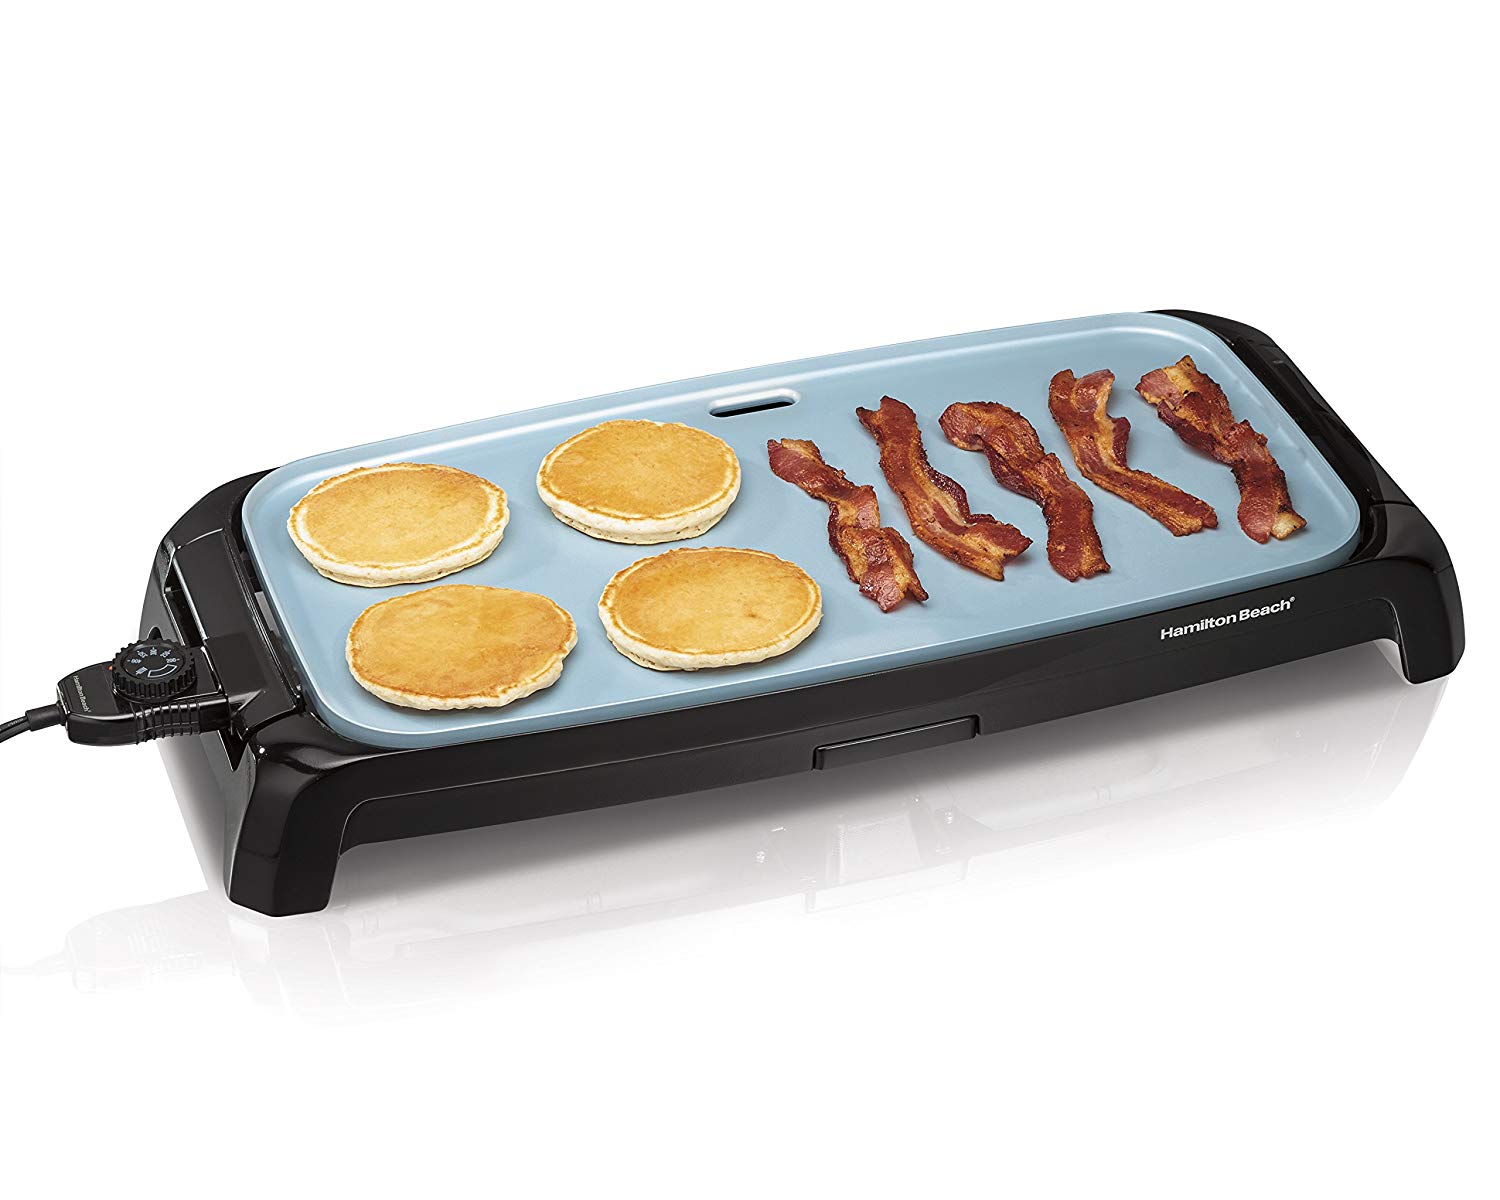 Let's find out how the best cast iron electric griddle makes food in a  healthier way. You can also check out the listed …